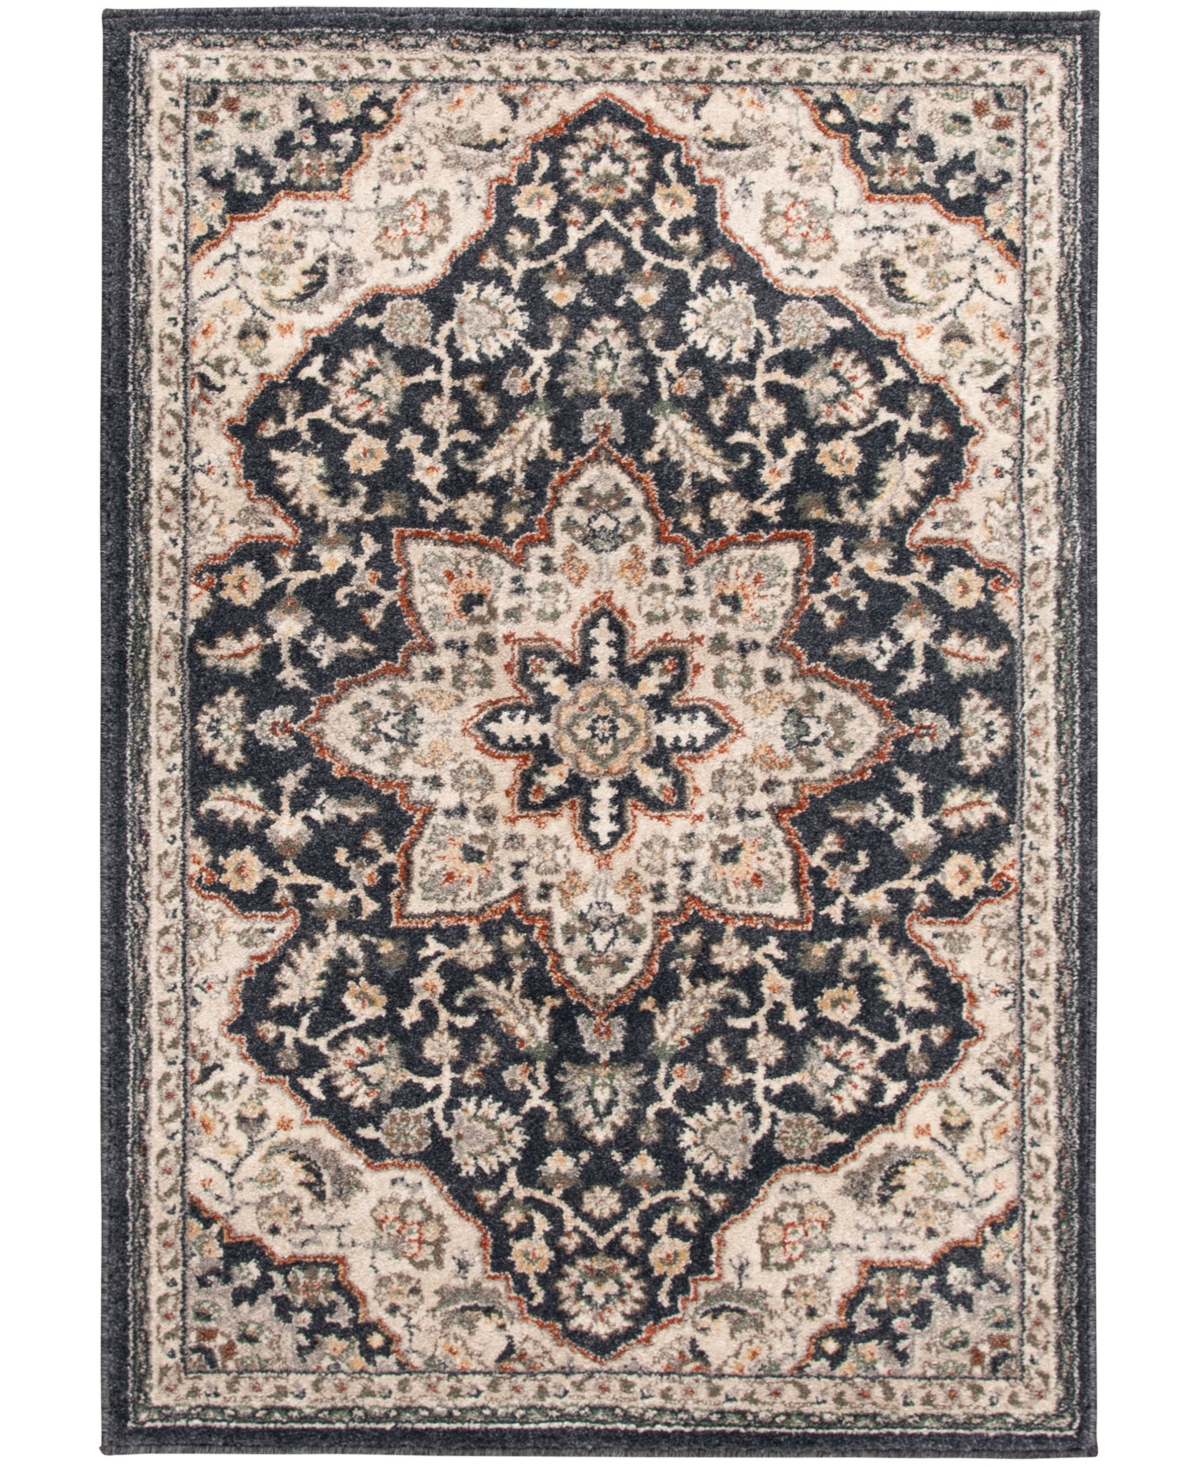 Km Home Poise Pse-7230 3'3" X 5' Area Rug In Blue